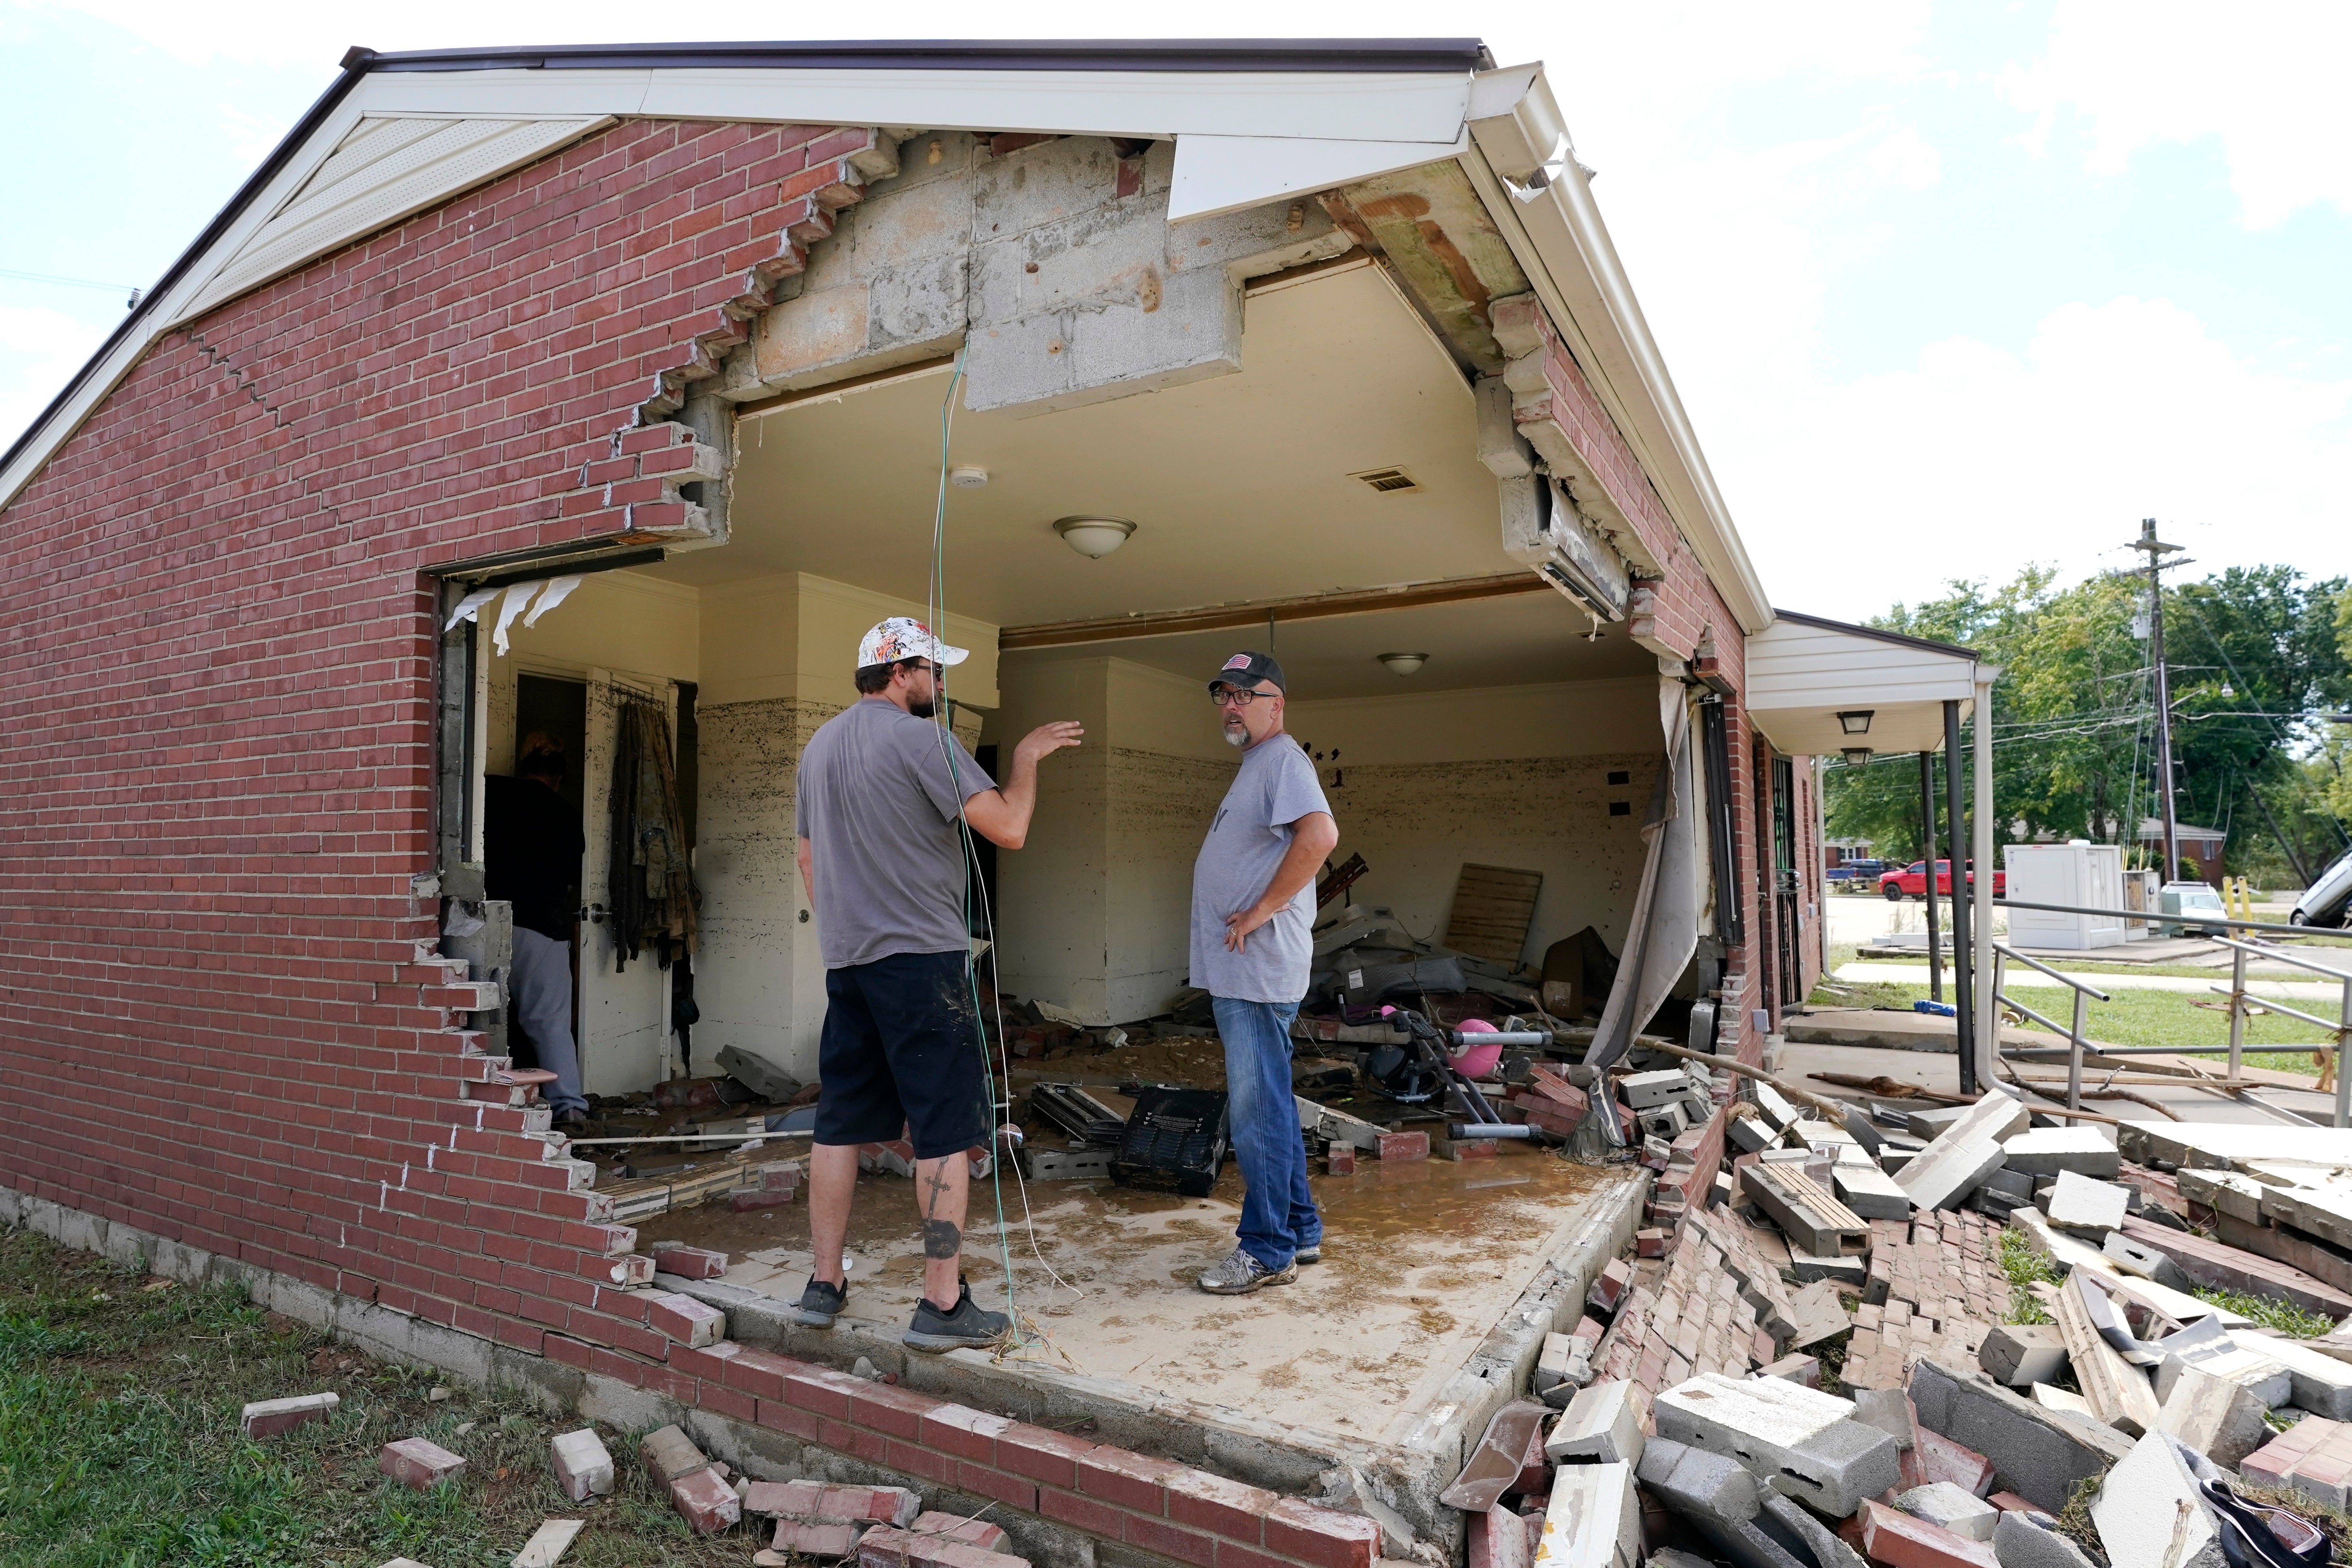 Brian Mitchell, right, looks through the damaged home of his mother-in-law along with family friend Chris Hoover in Waverly on Sunday